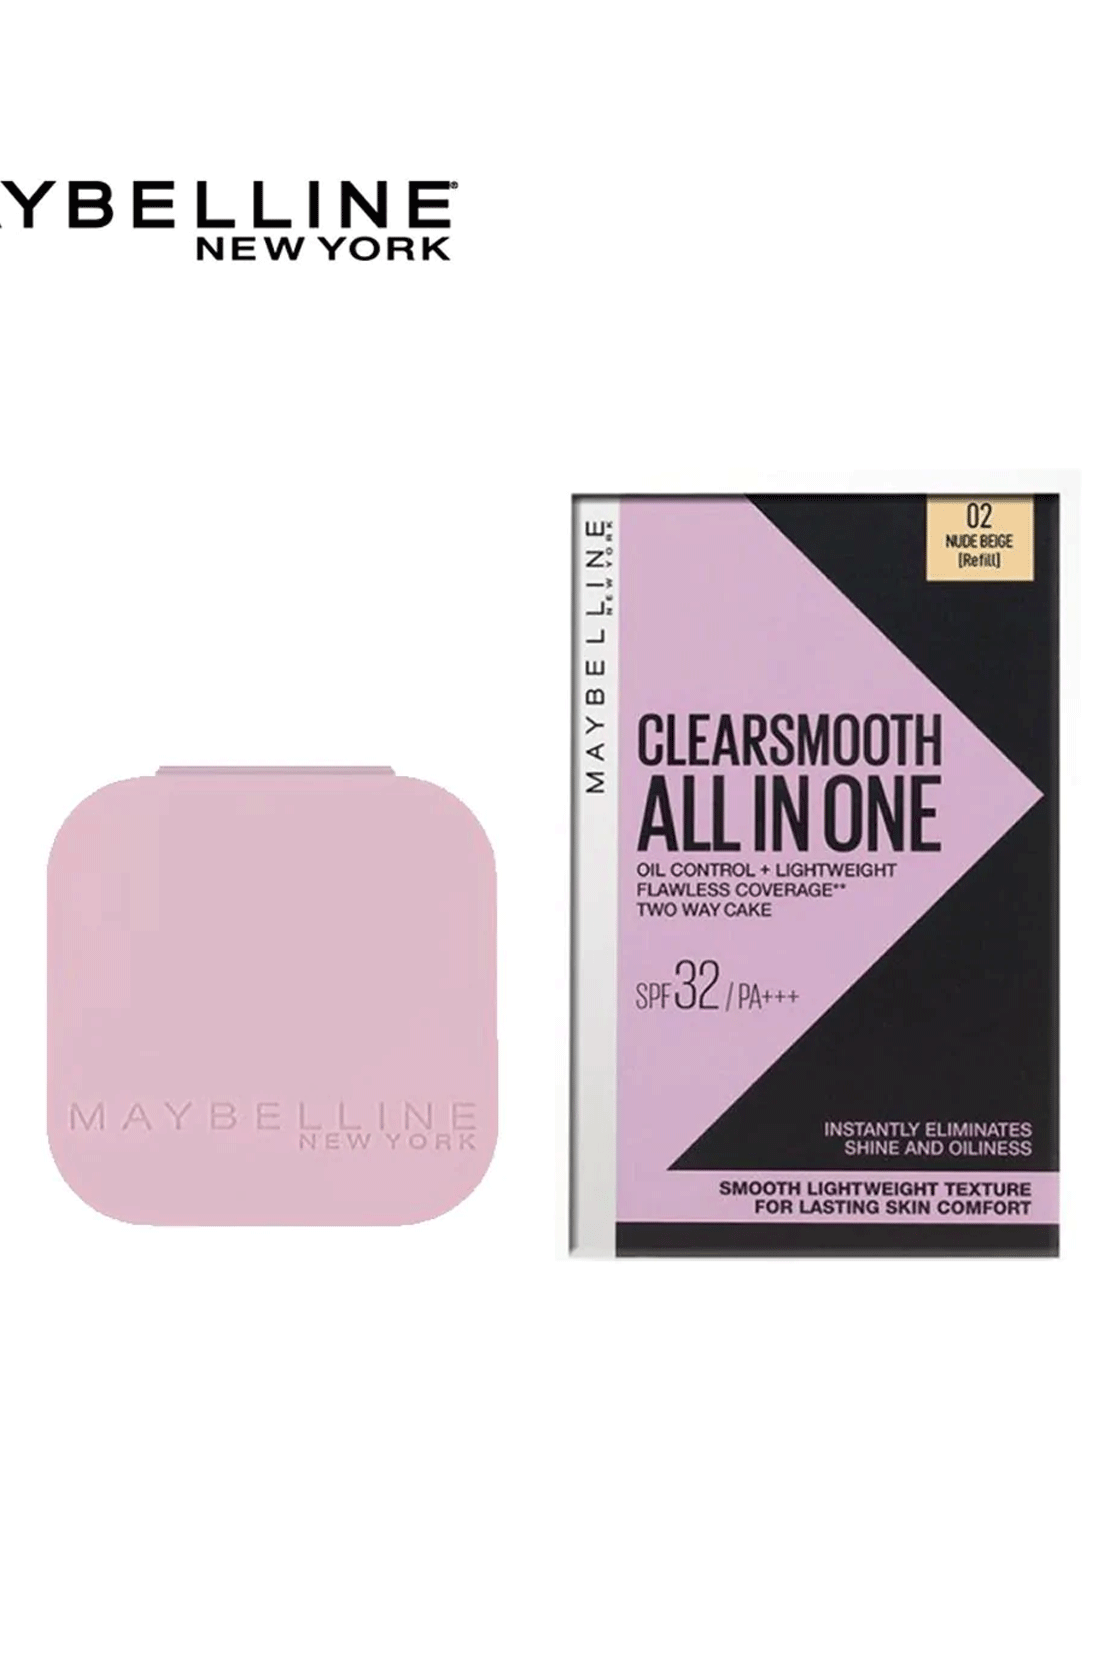 Clear Smooth All In One Powder Foundation - 02 Nude Beige RIOS